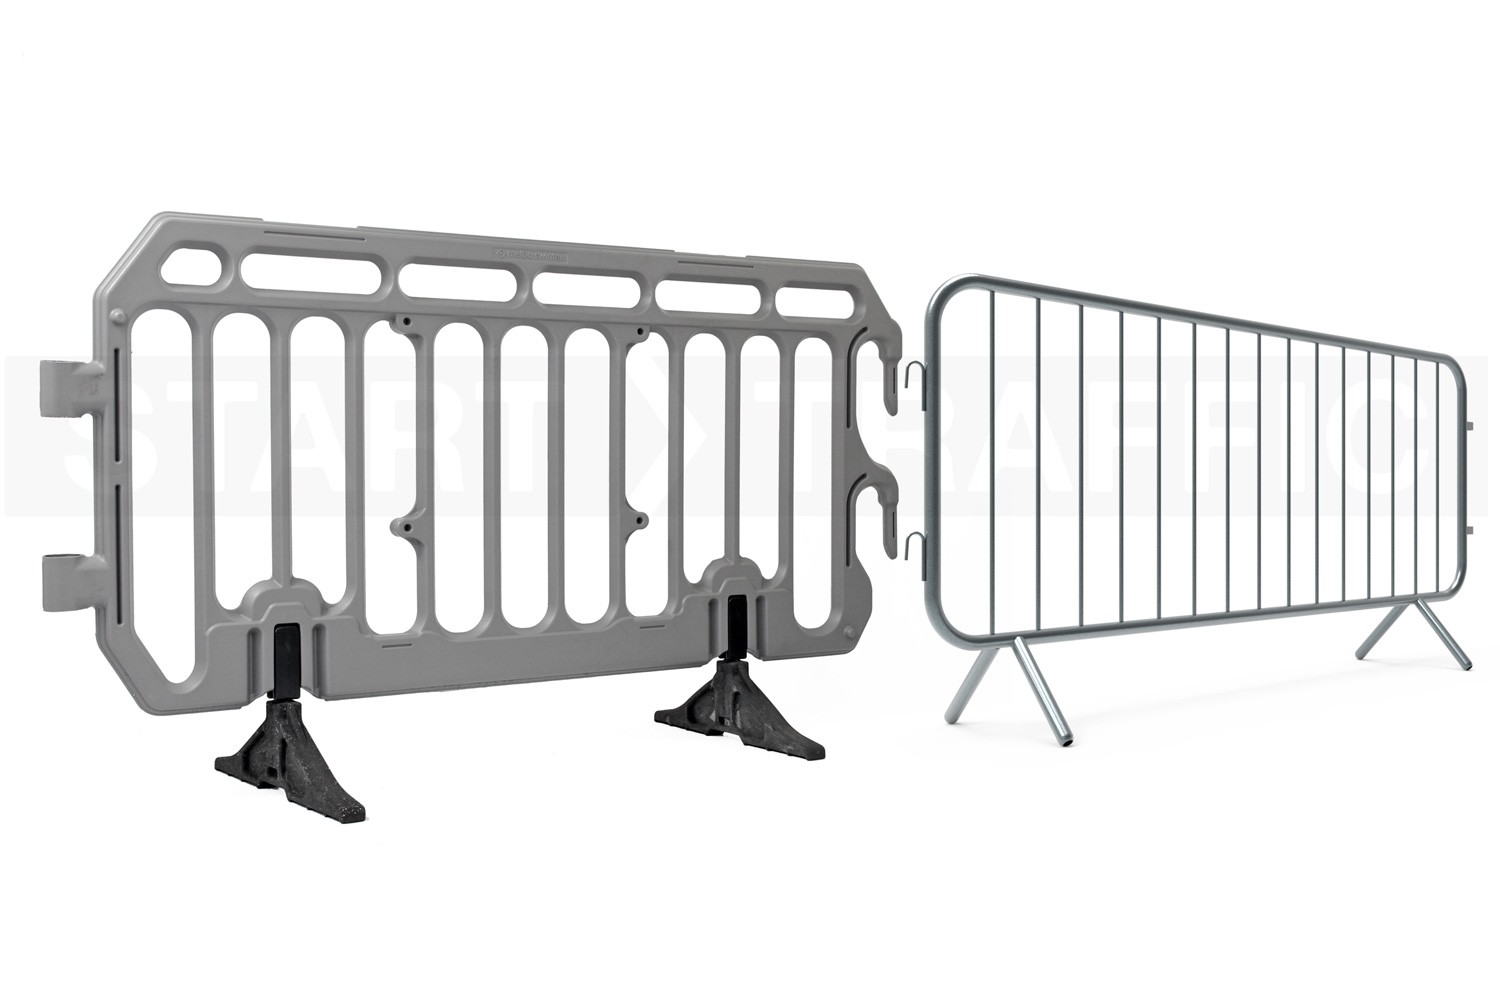 Montage of Crowd barrier types